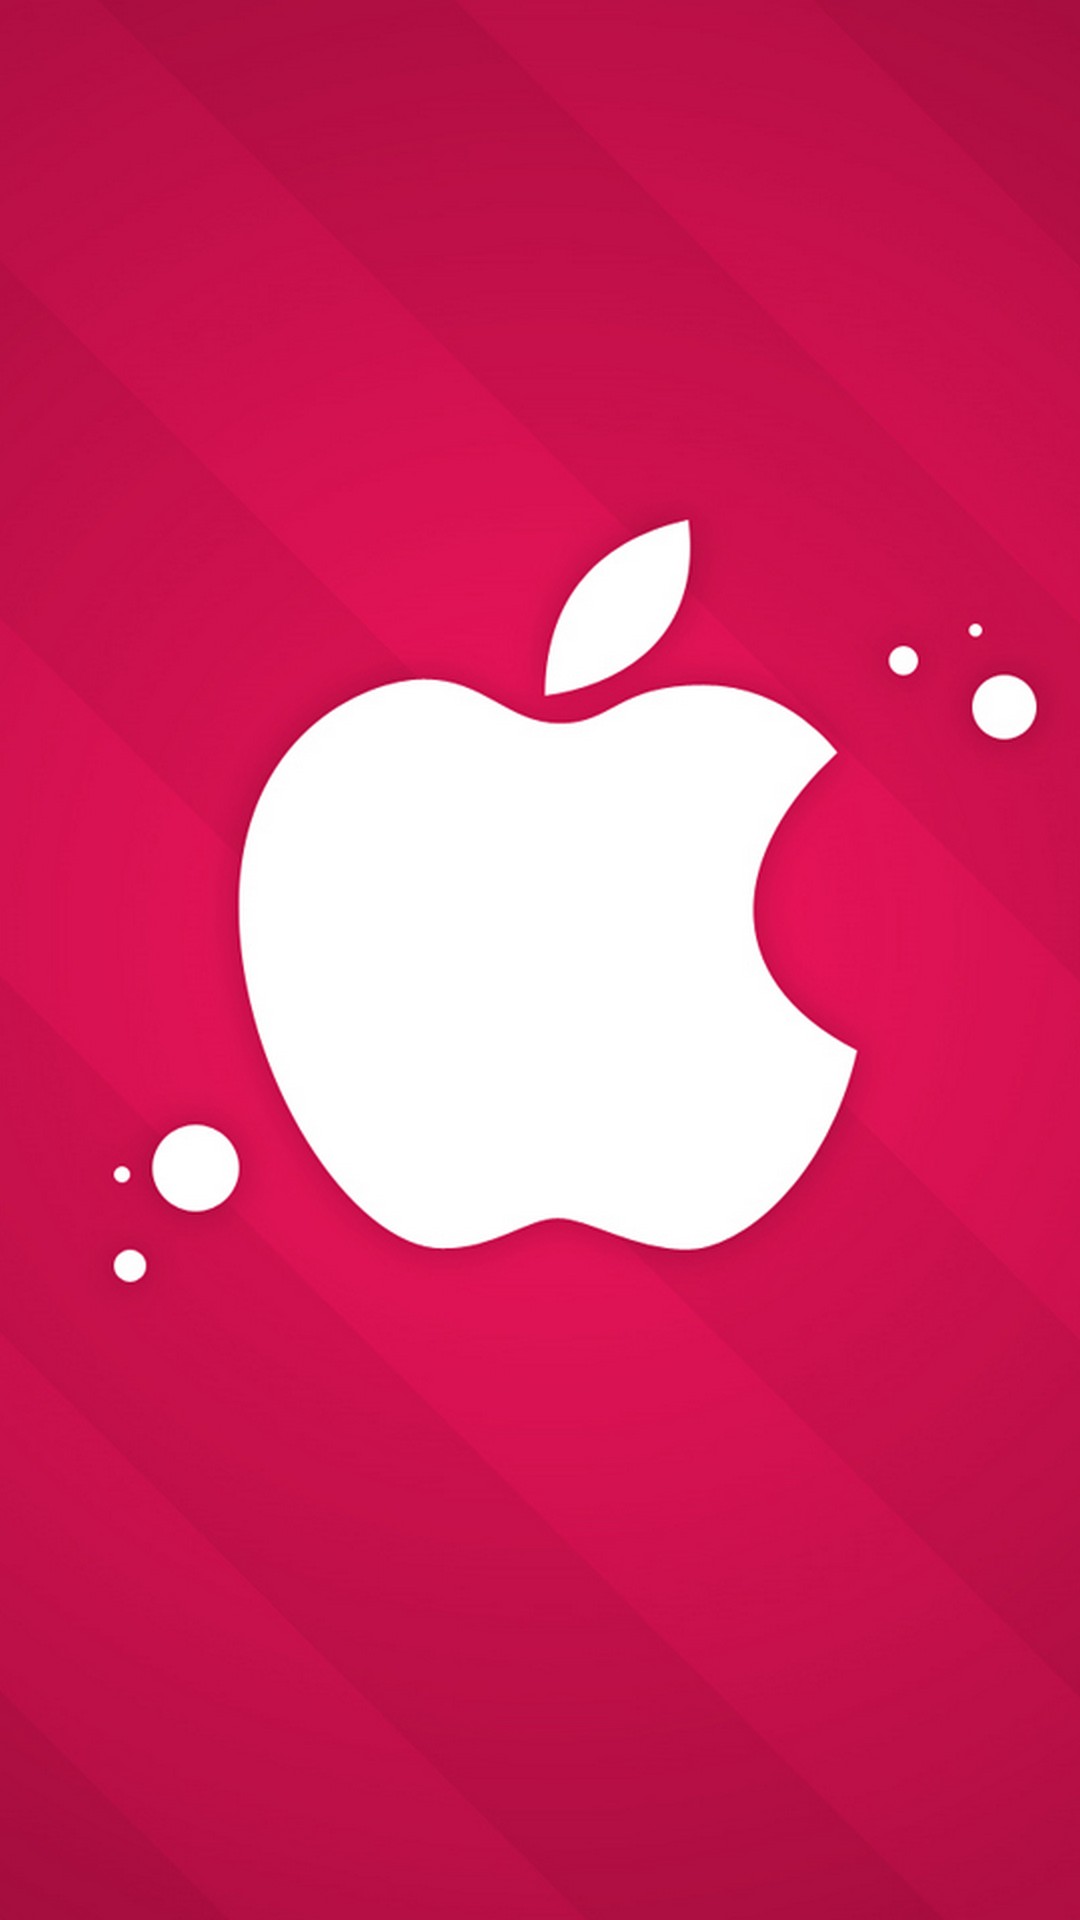 Apple Girly Wallpaper For Android Phones